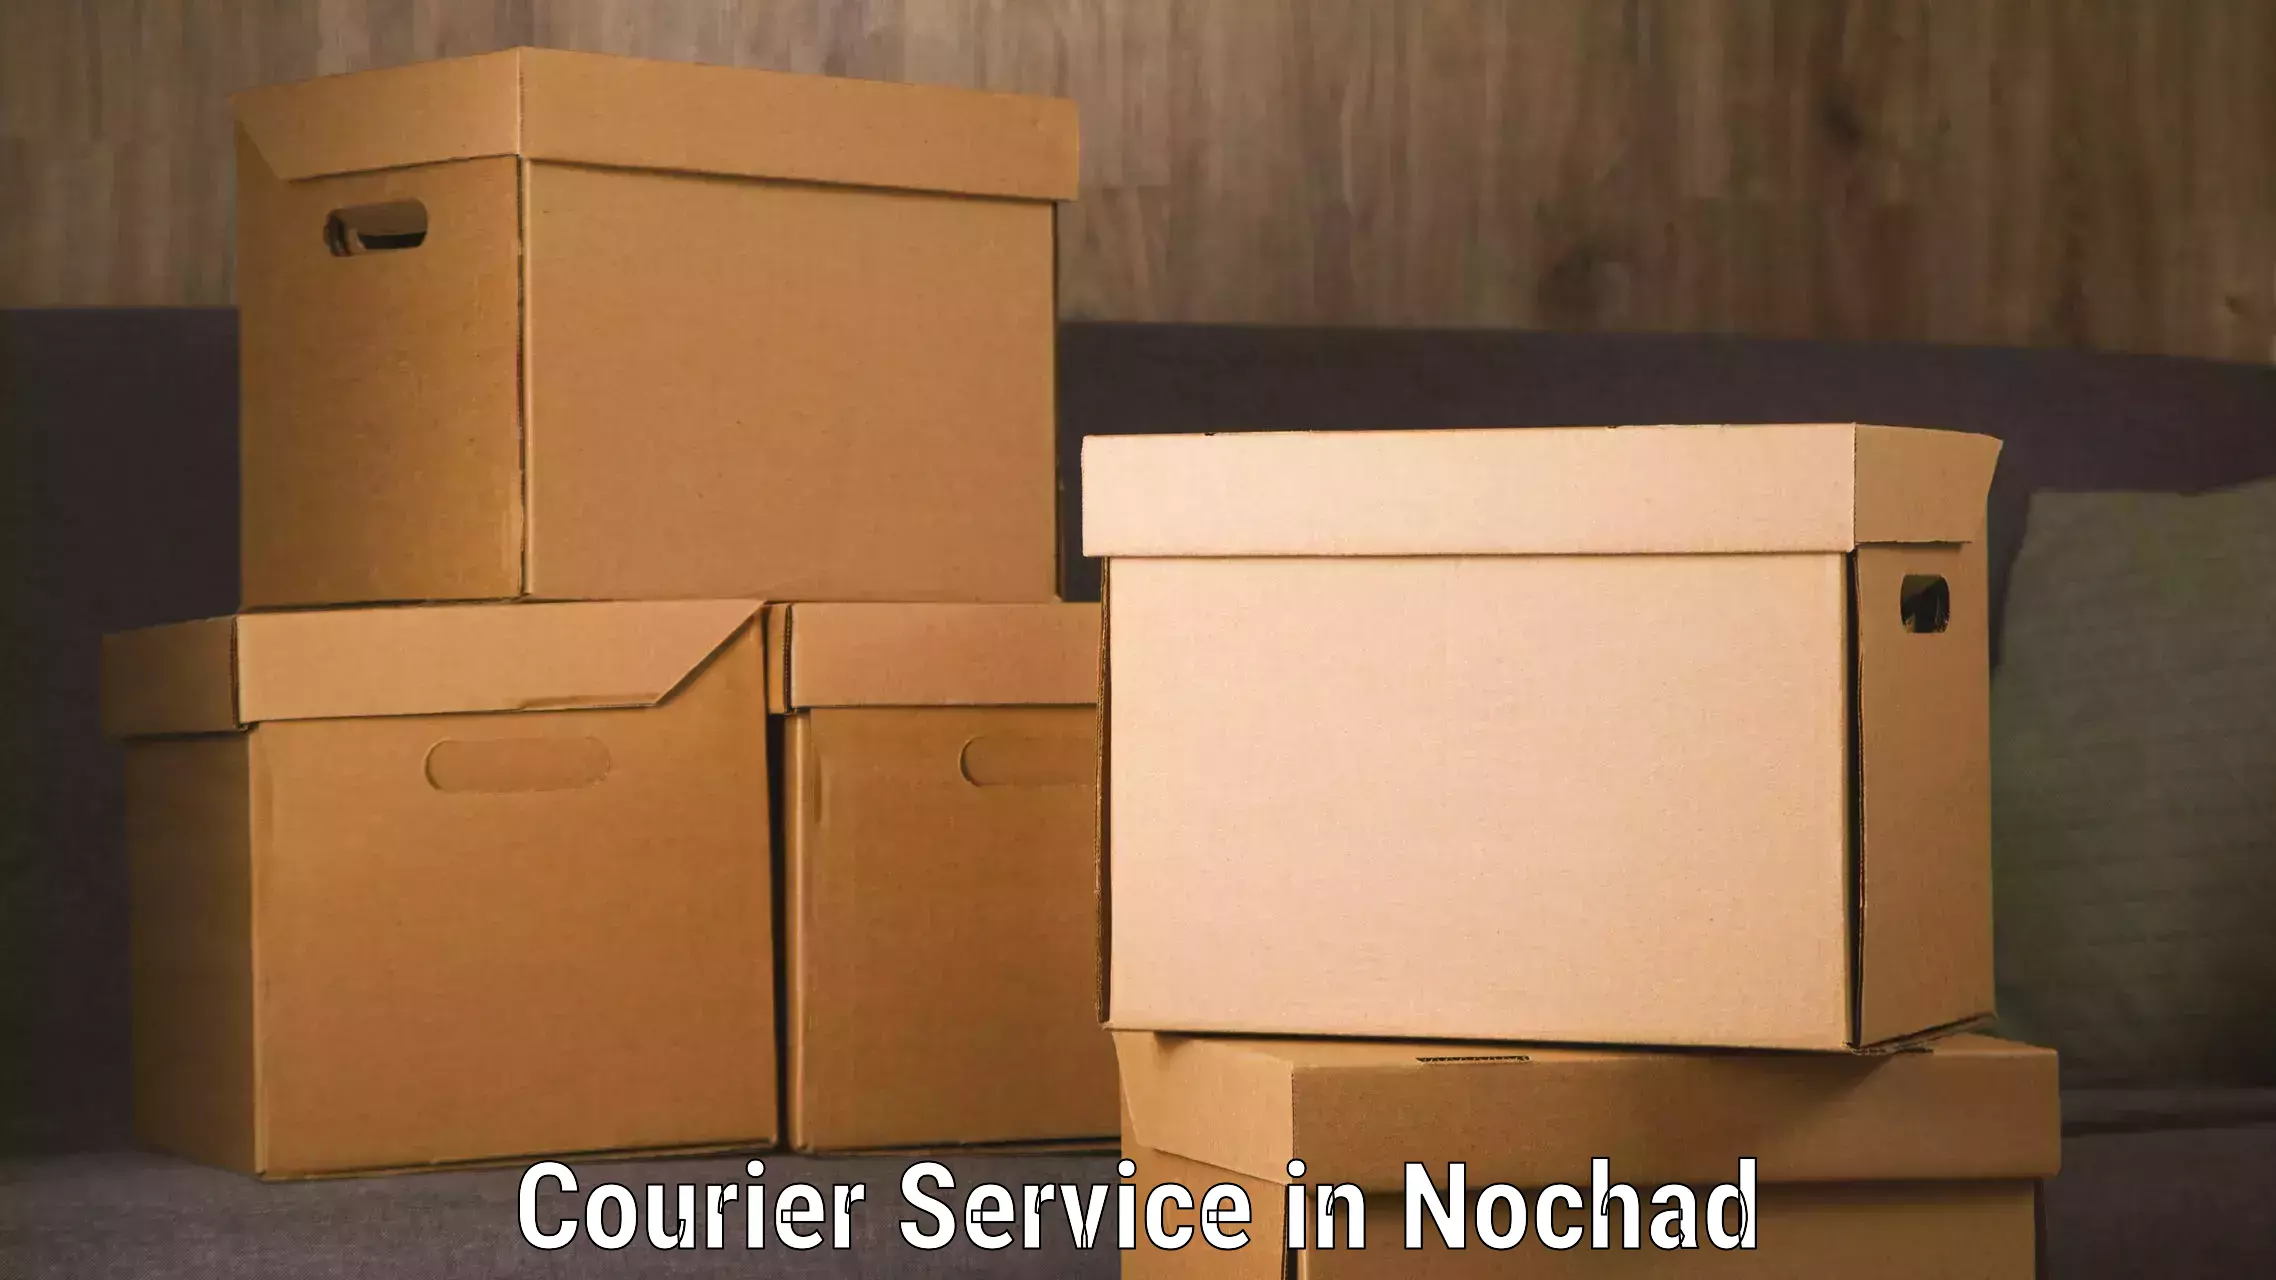 Multi-carrier shipping in Nochad